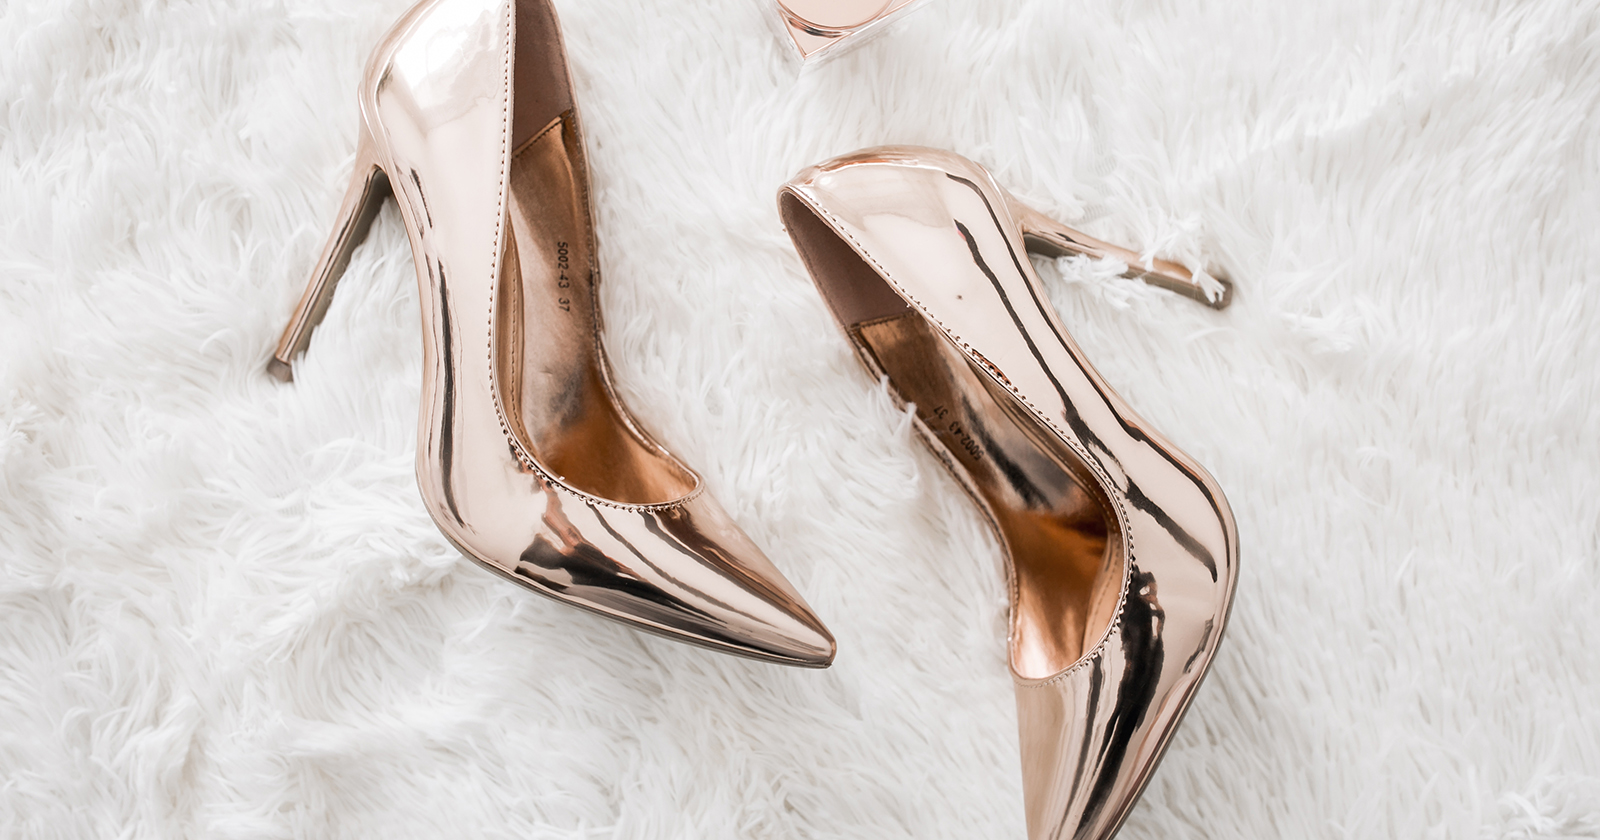 Gold Shoes For Wedding: 18 Dazzling Ideas + Faqs